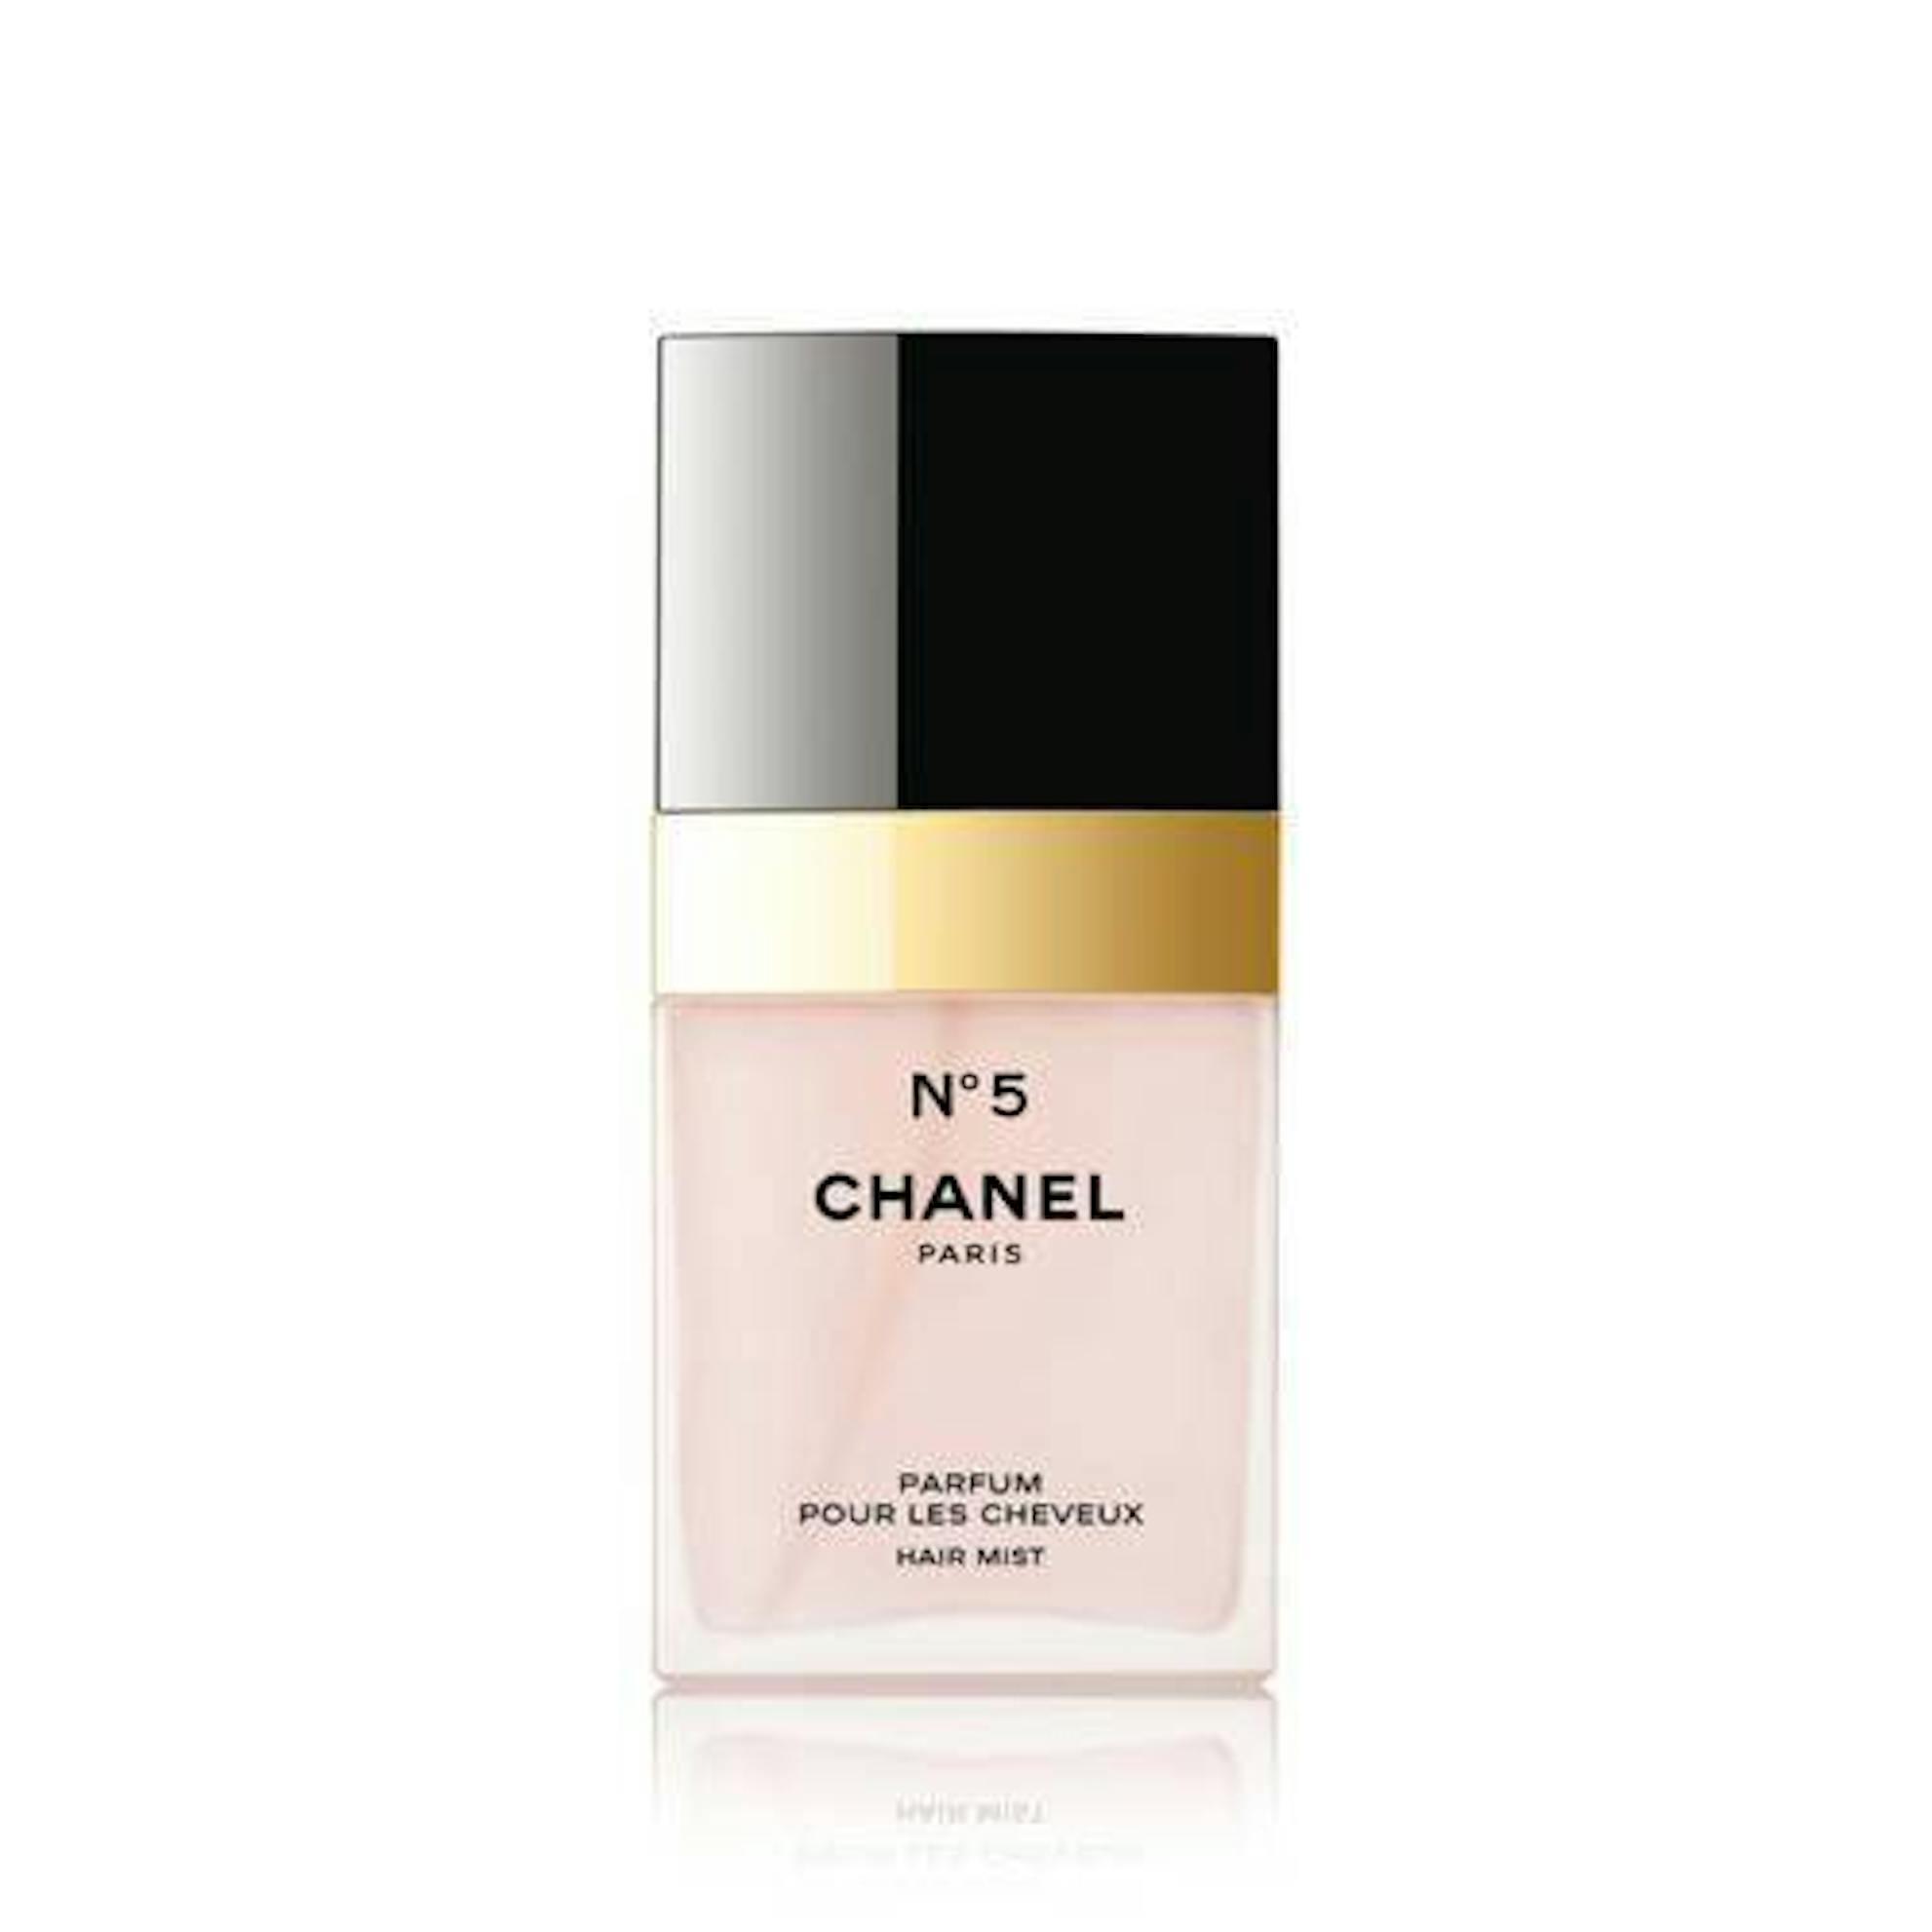 Chanel No 5 Hair Mist Chanel perfume - a fragrance for women